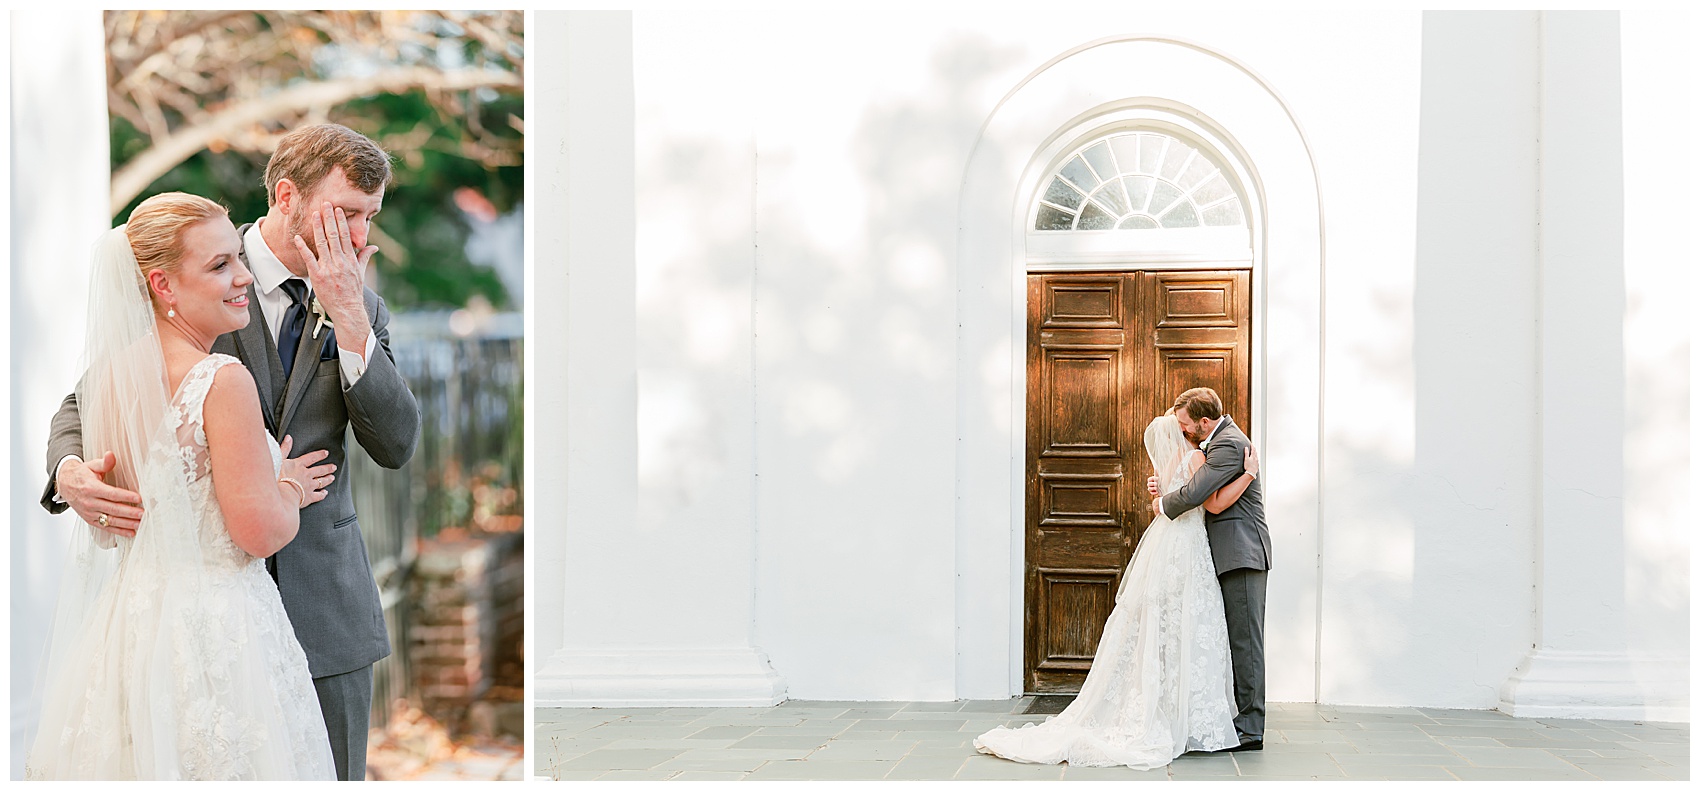 wedding at a historic church in downtown charleston